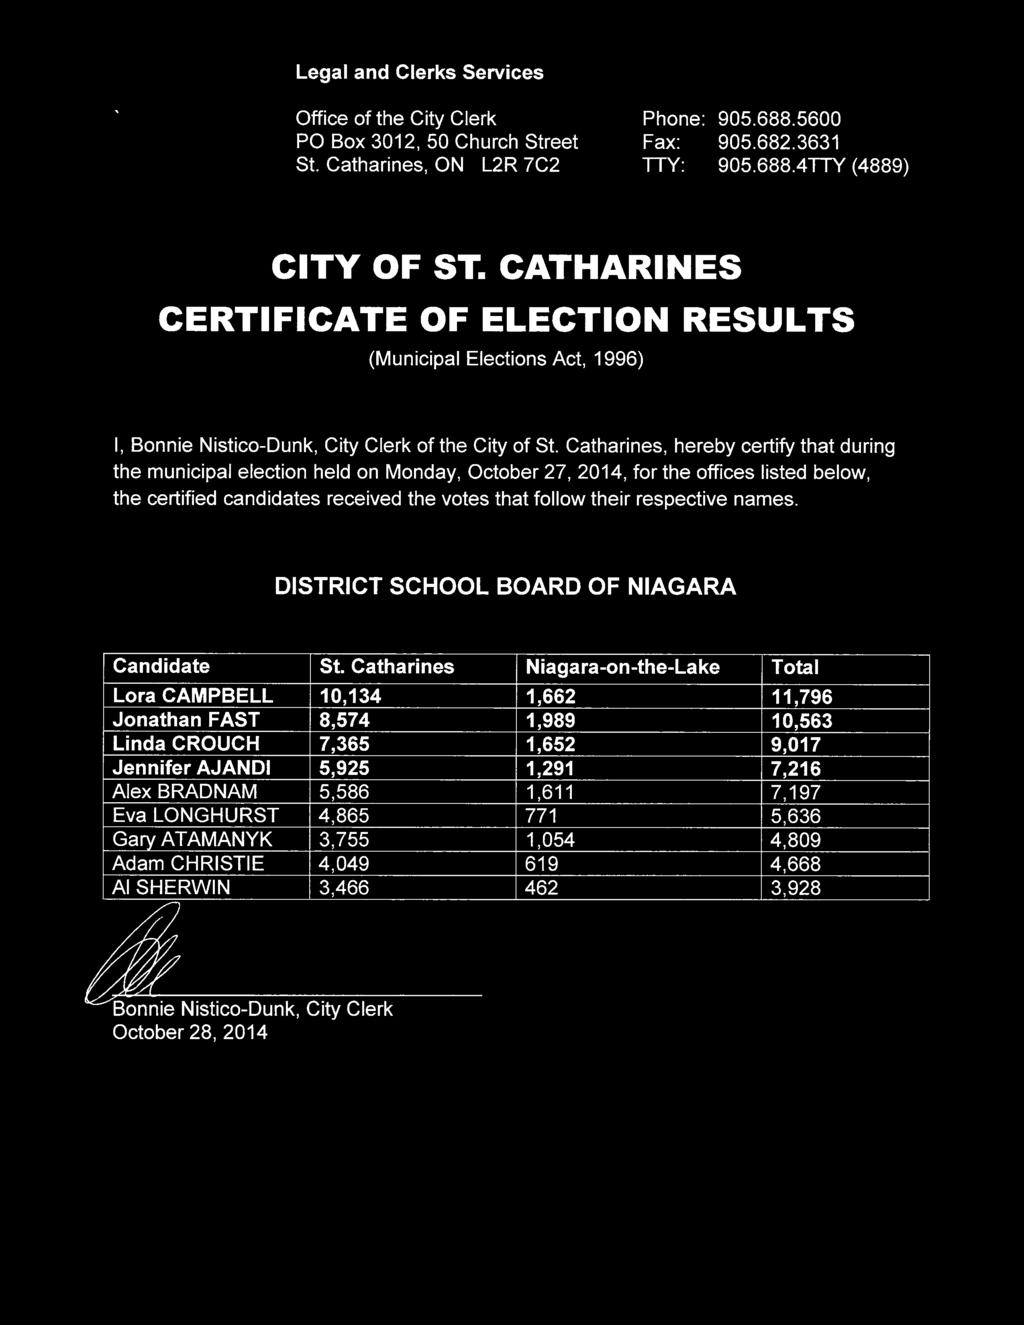 Catharines, hereby certify that during the municipal election held on Monday, October 27, 2014, for the offices listed below, the certified candidates received the votes that follow their respective